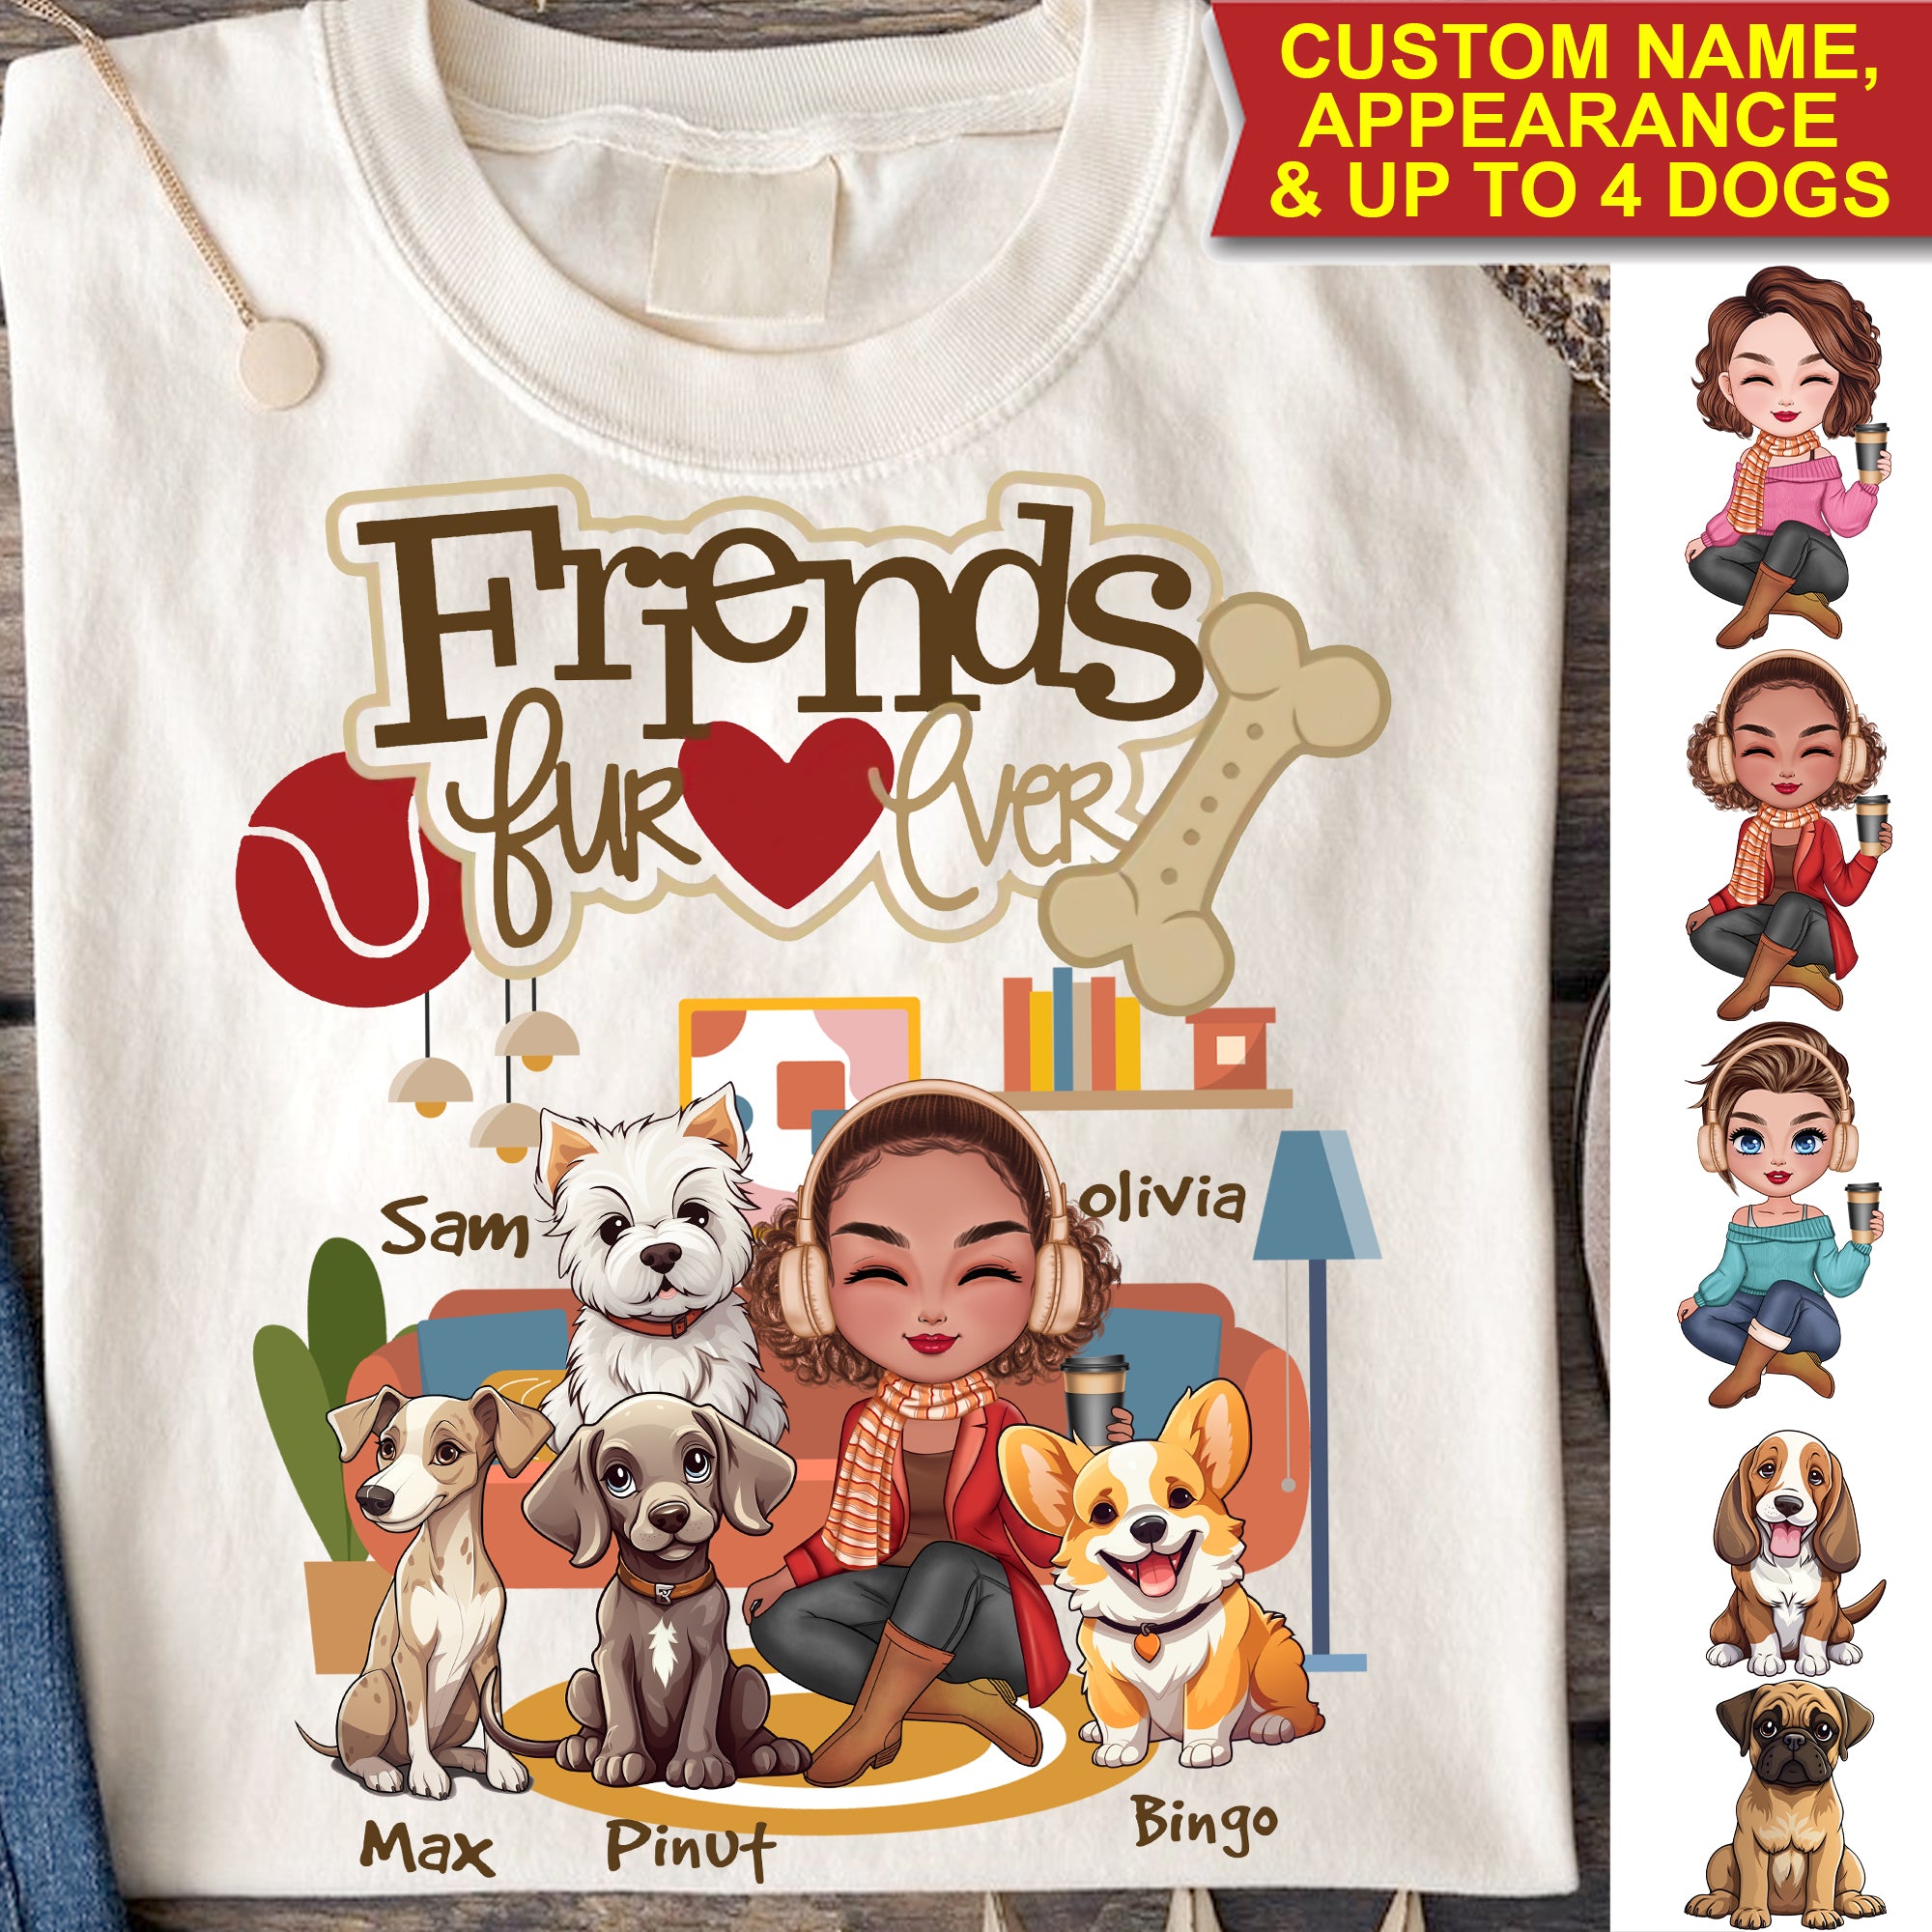 Firend Furever - Custom Appearance, Dogs And Names - Personalized T-Shirt - Gift For Pet Lover